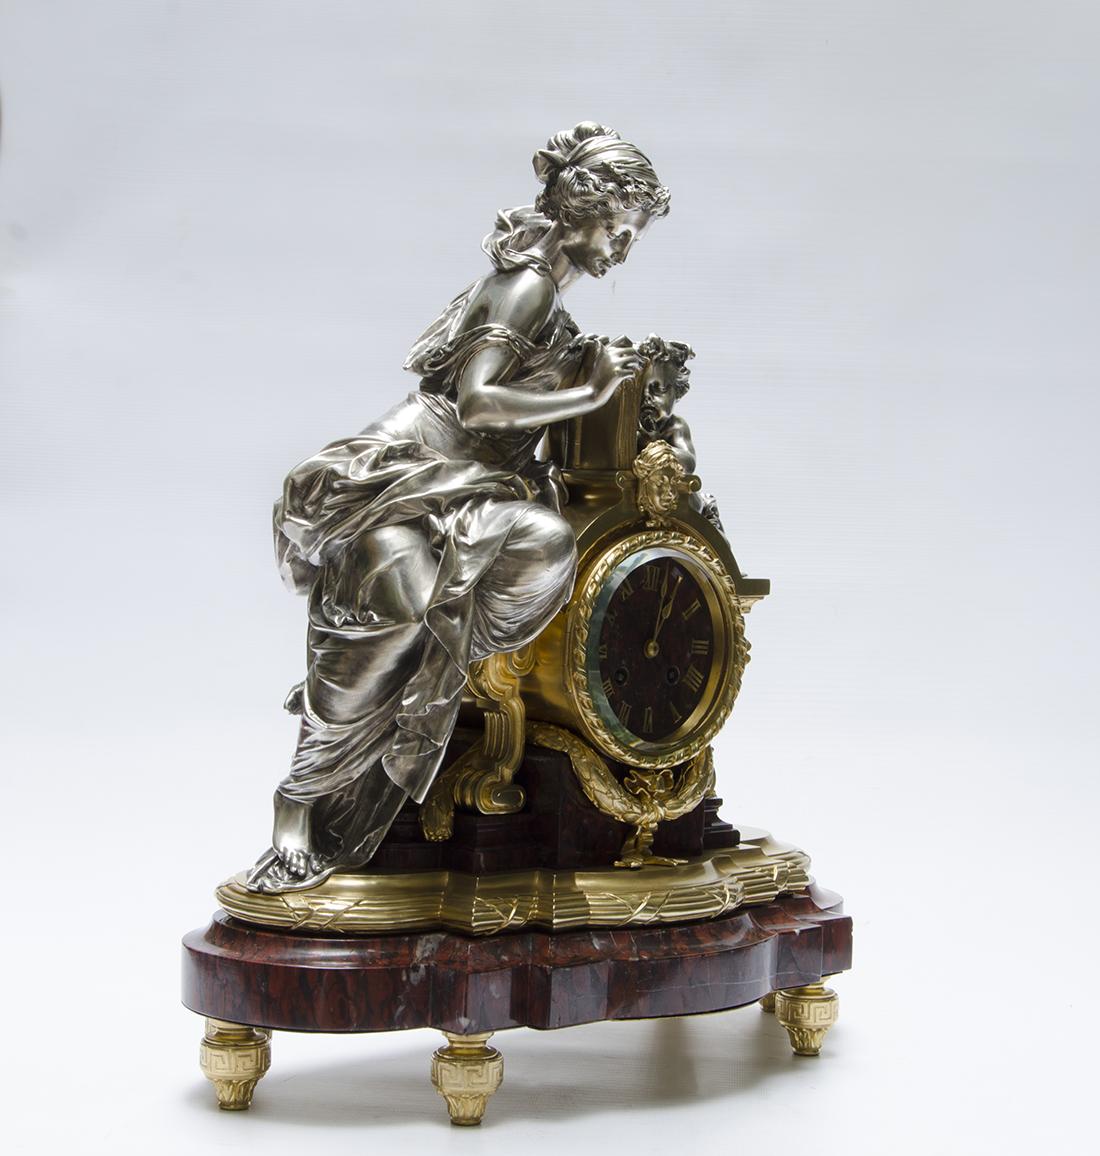 Polished 19th Century French Louis XVI Ormolu Mantel Clock by Lamerie-Charpentier & Cie. For Sale